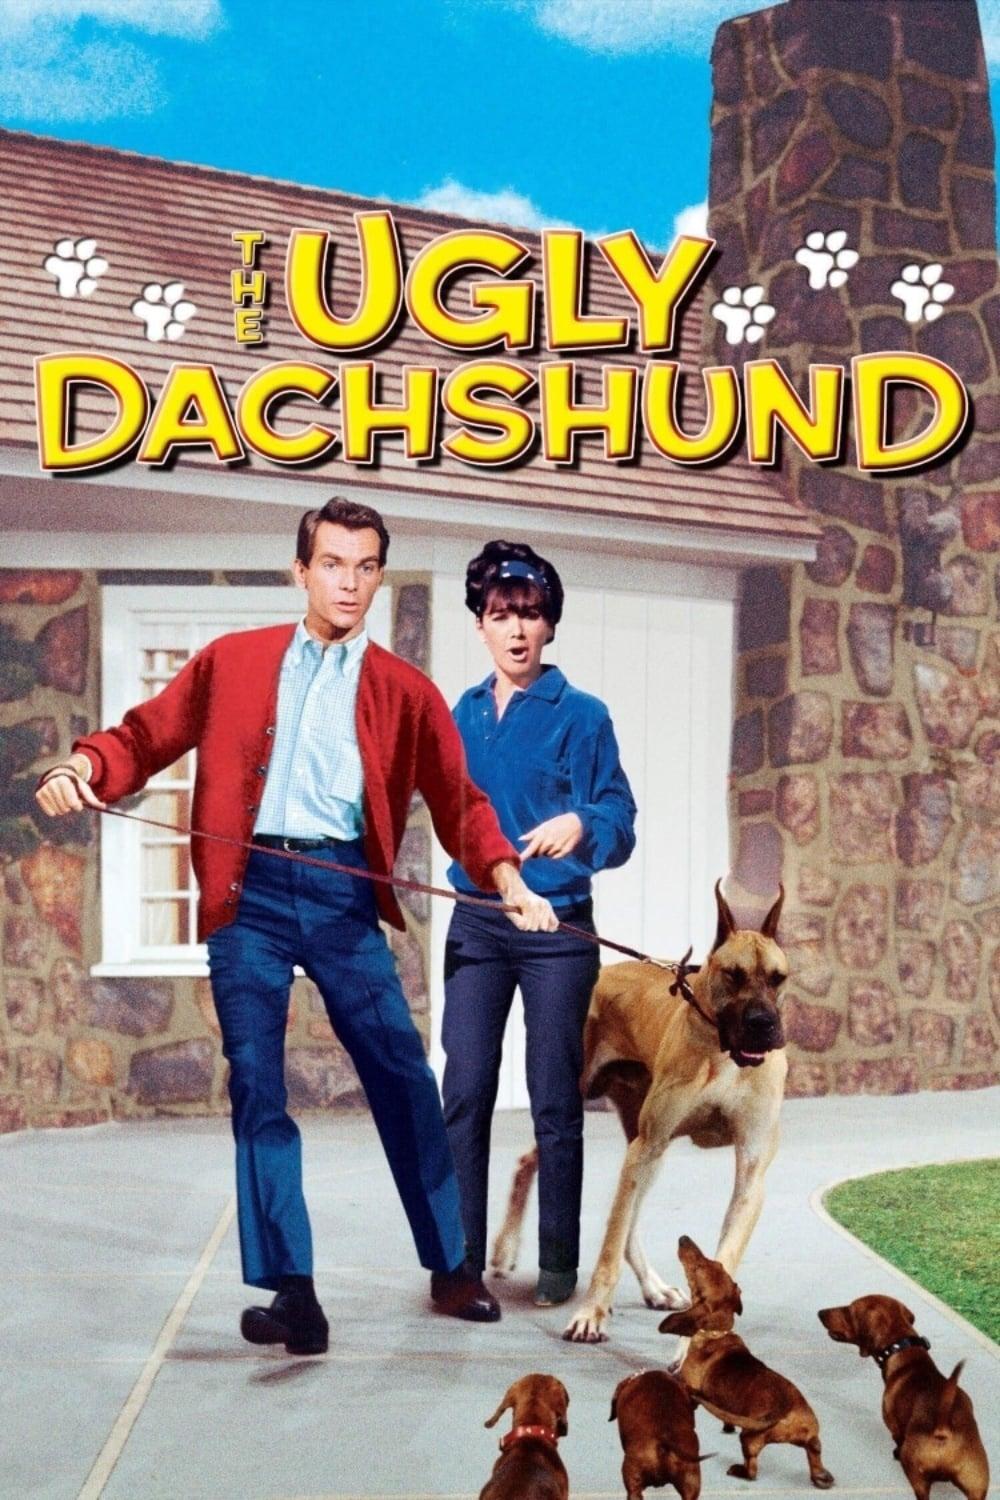 The Ugly Dachshund poster